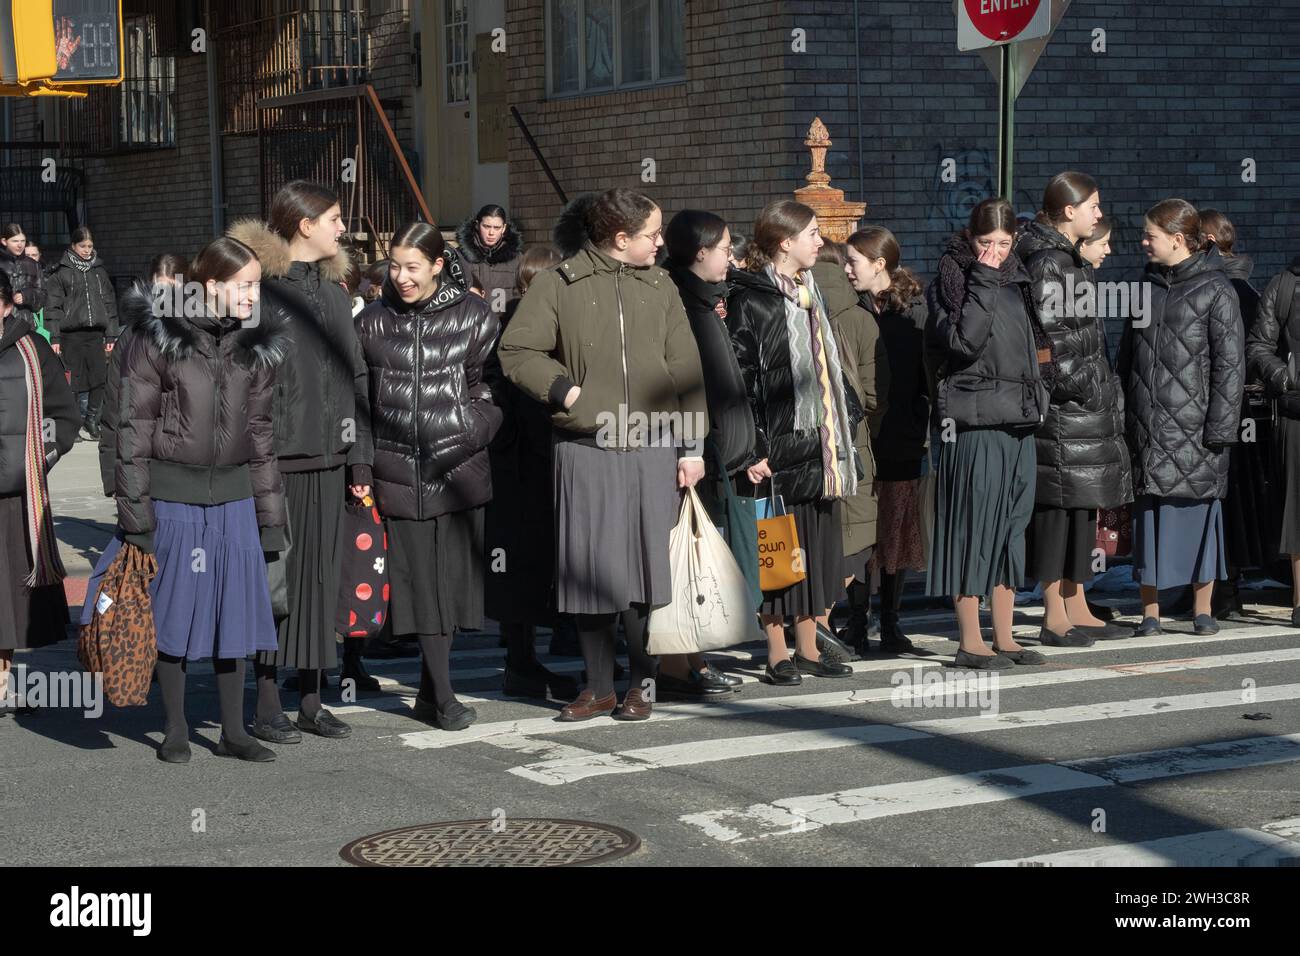 On their way to school, a large group of orthodox Jewish girls dressed modestly, wait for a light to change. In Brooklyn, New York. Stock Photo